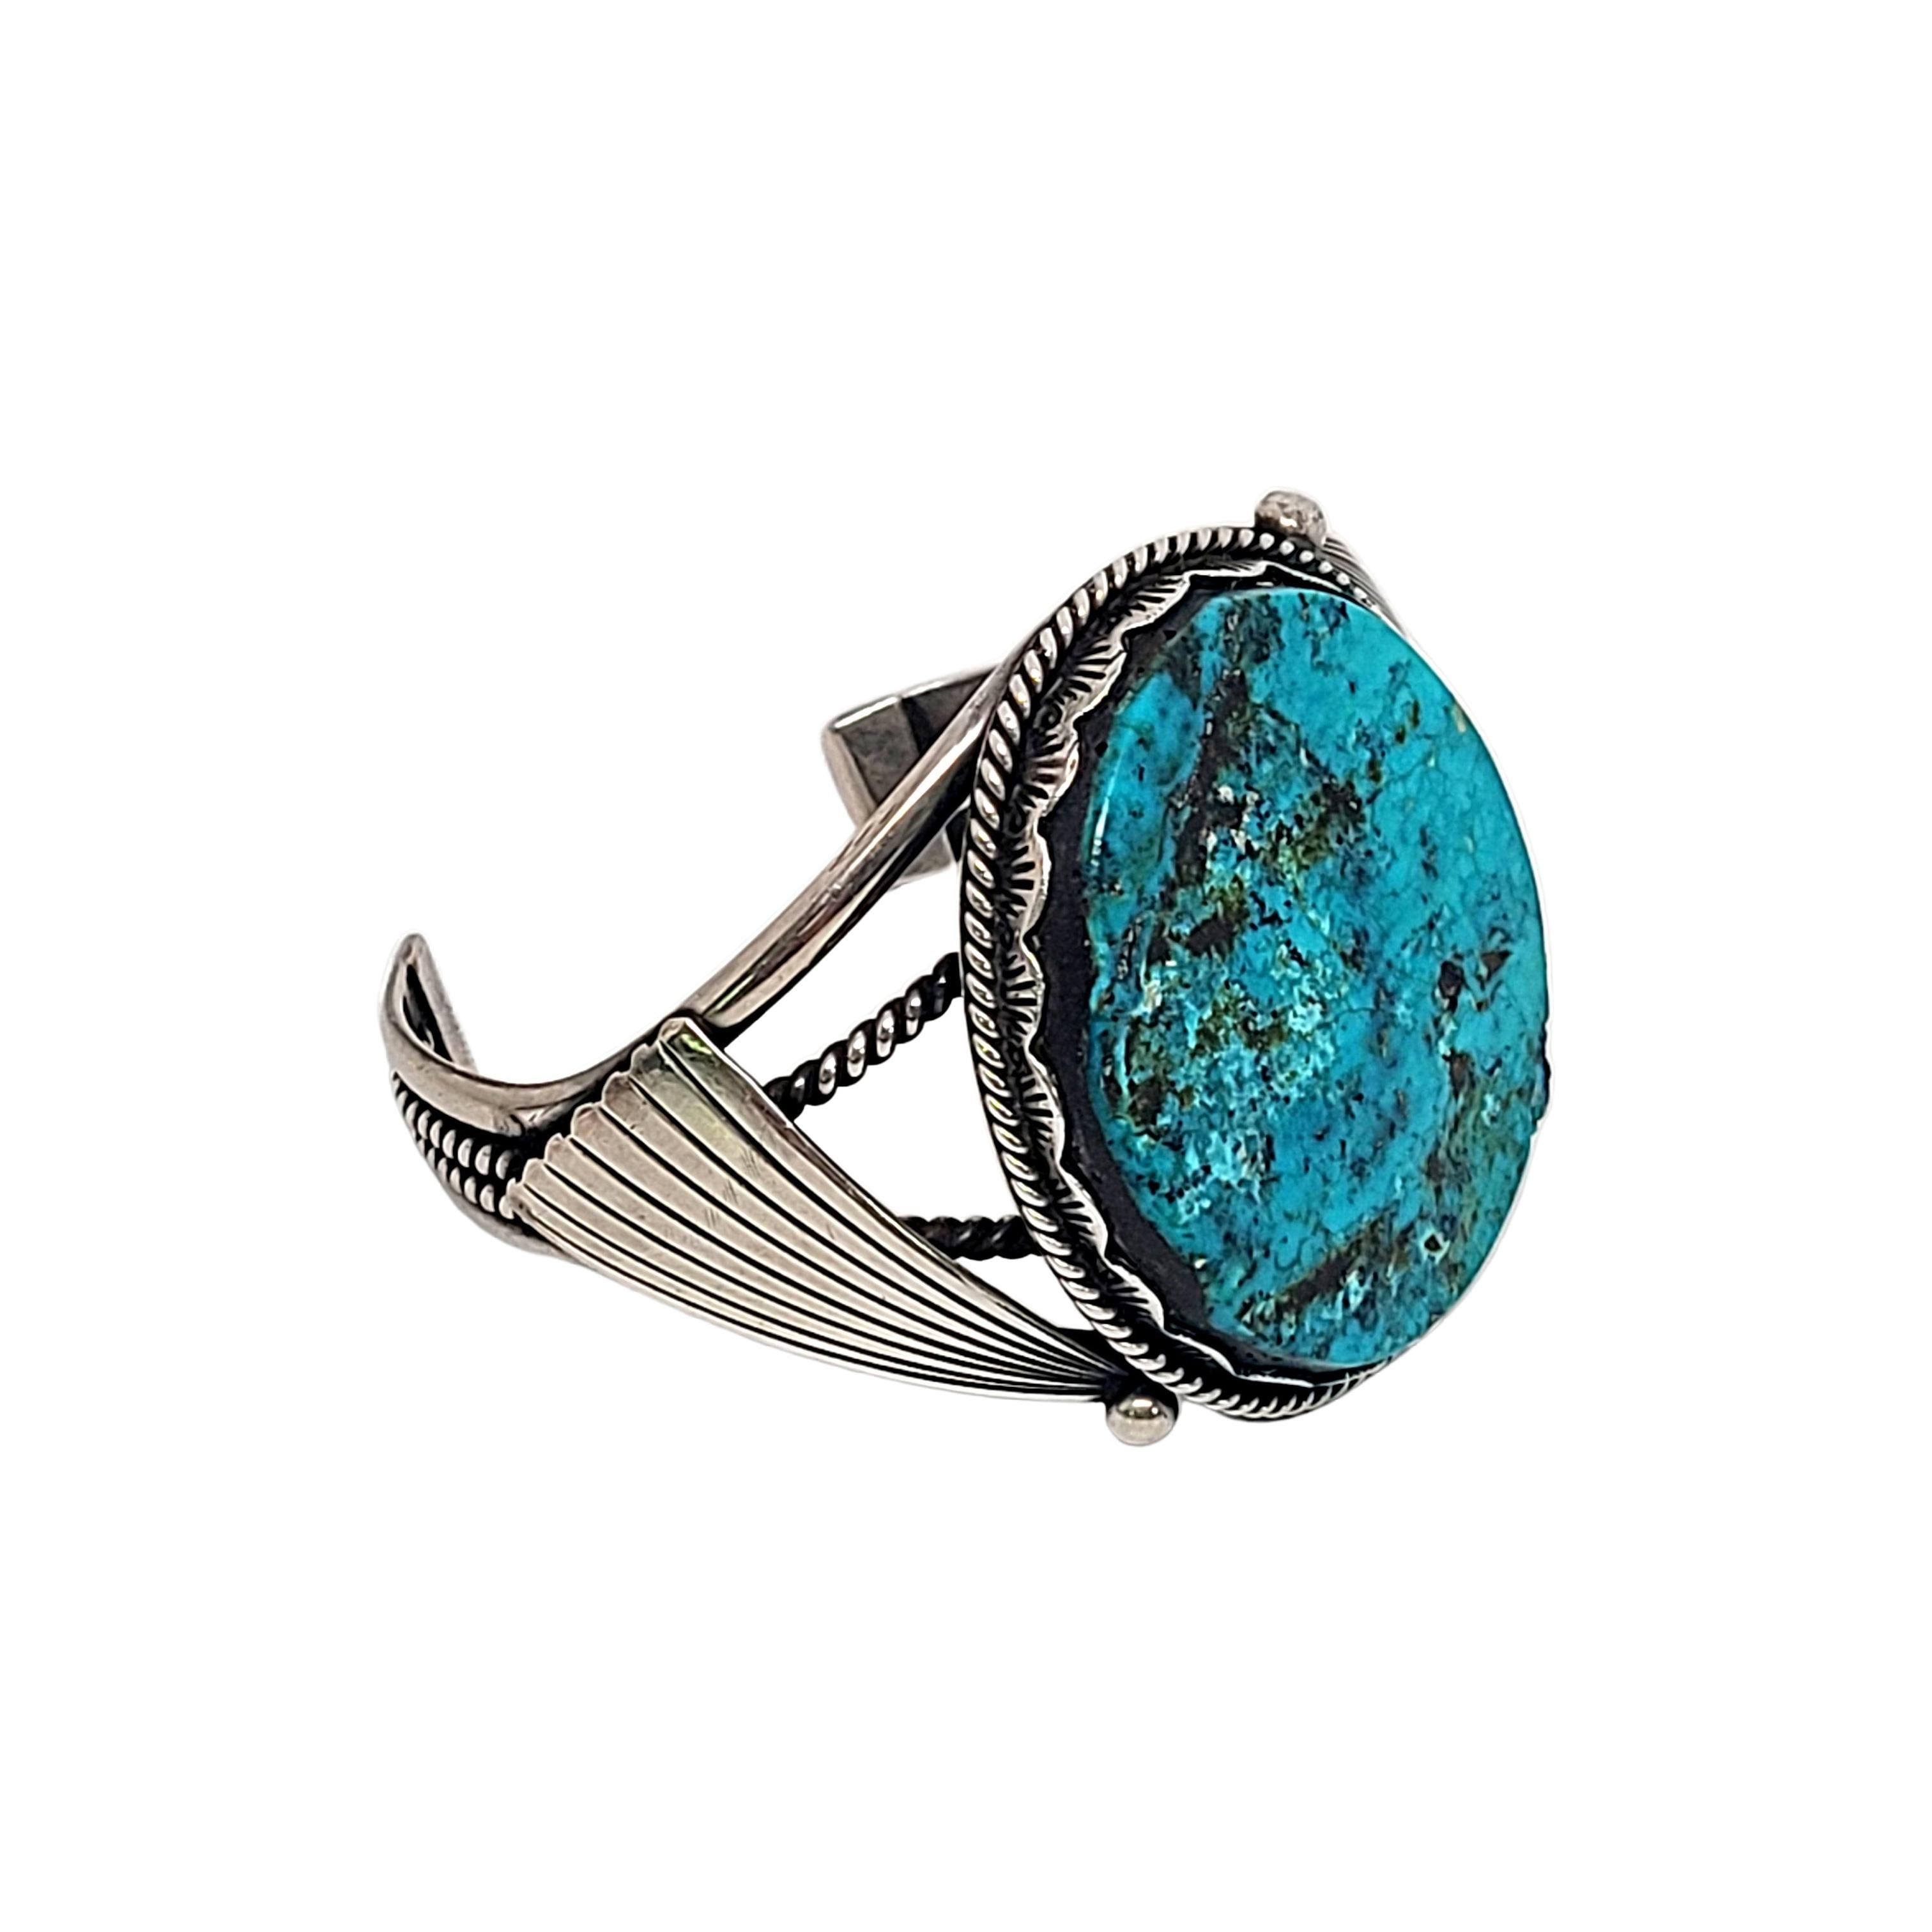 Sterling silver and turquoise cuff bracelet by Native American artisan.

Bezel set large oval shaped turquoise stone with rope design, stamp and open-work sides.

Measures approx 6 1/2